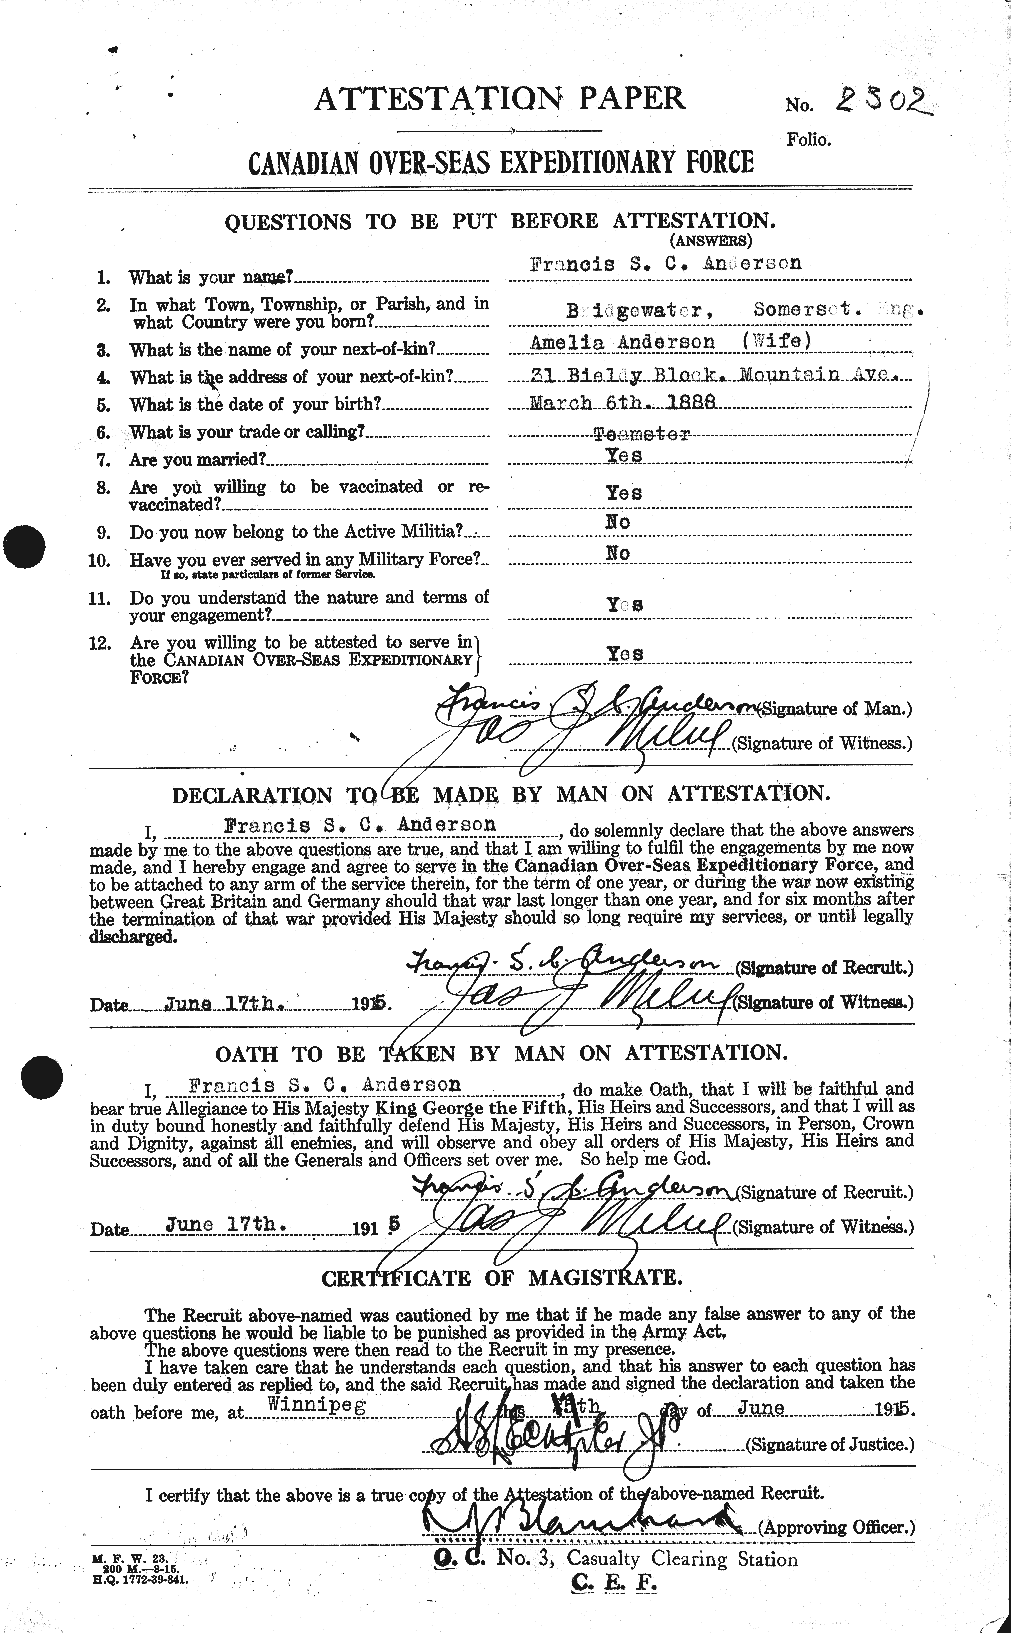 Personnel Records of the First World War - CEF 209864a